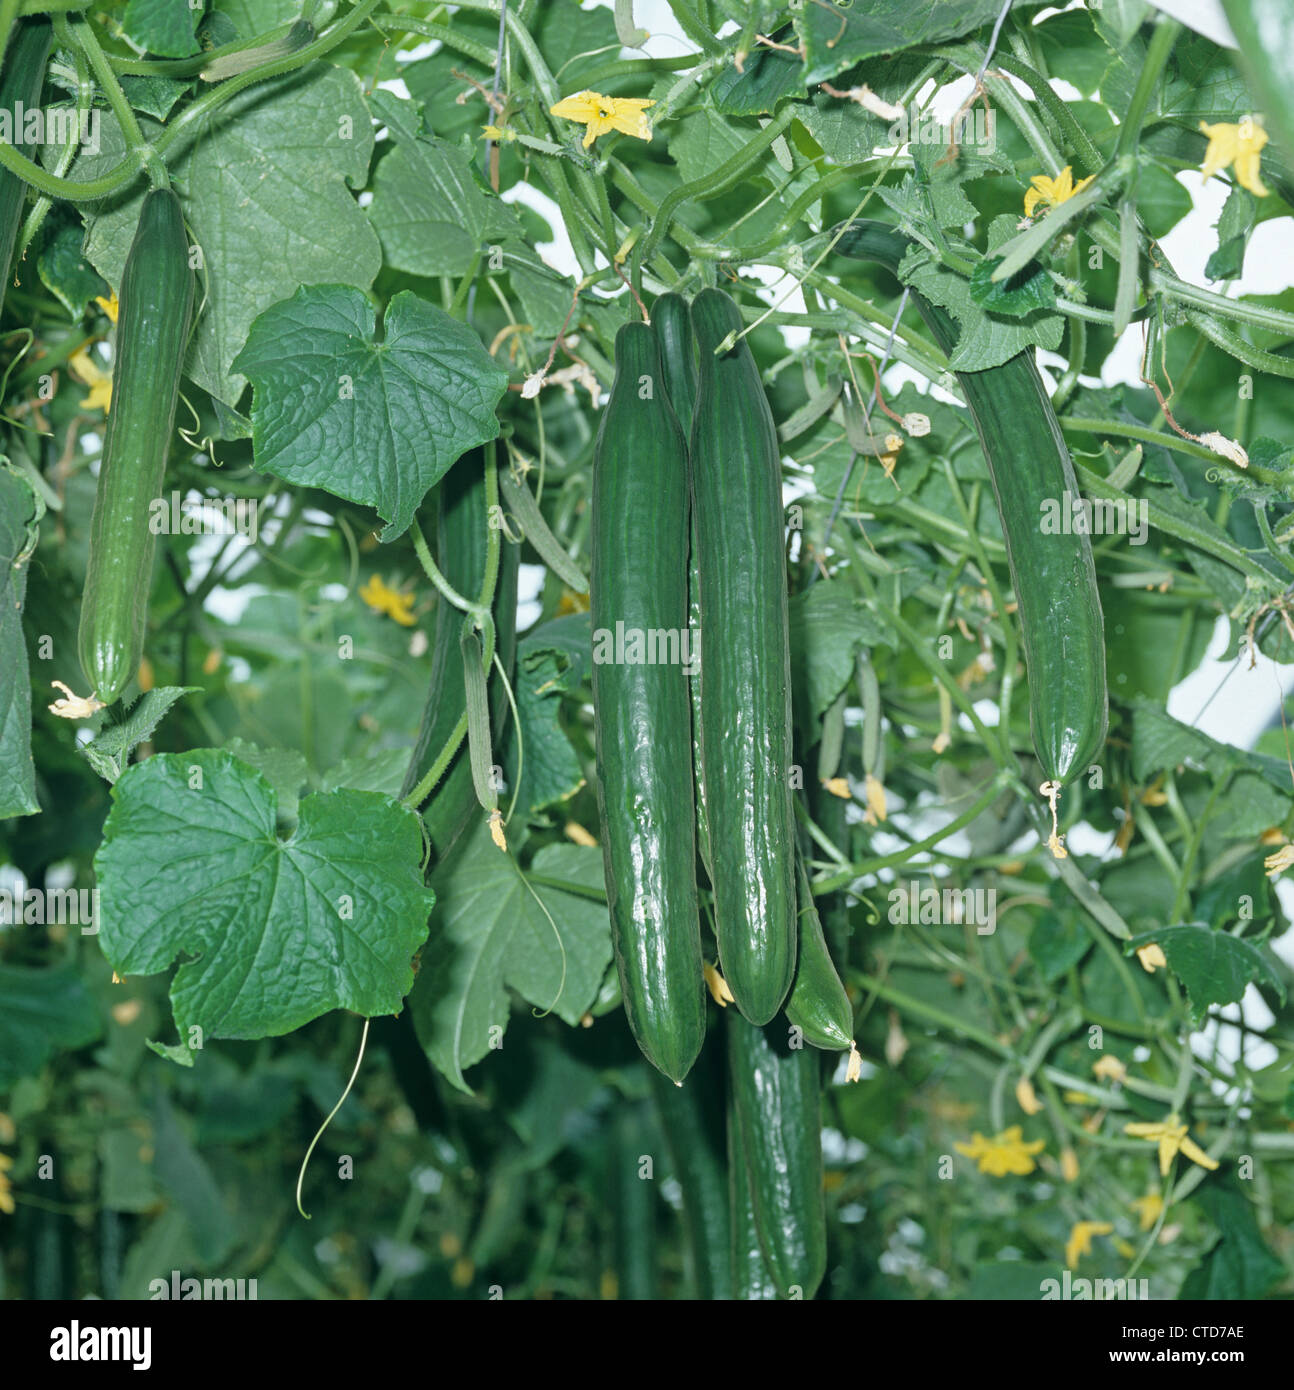 Mature cucumbers grown under glass with a hydroponic feeding and watering system Stock Photo